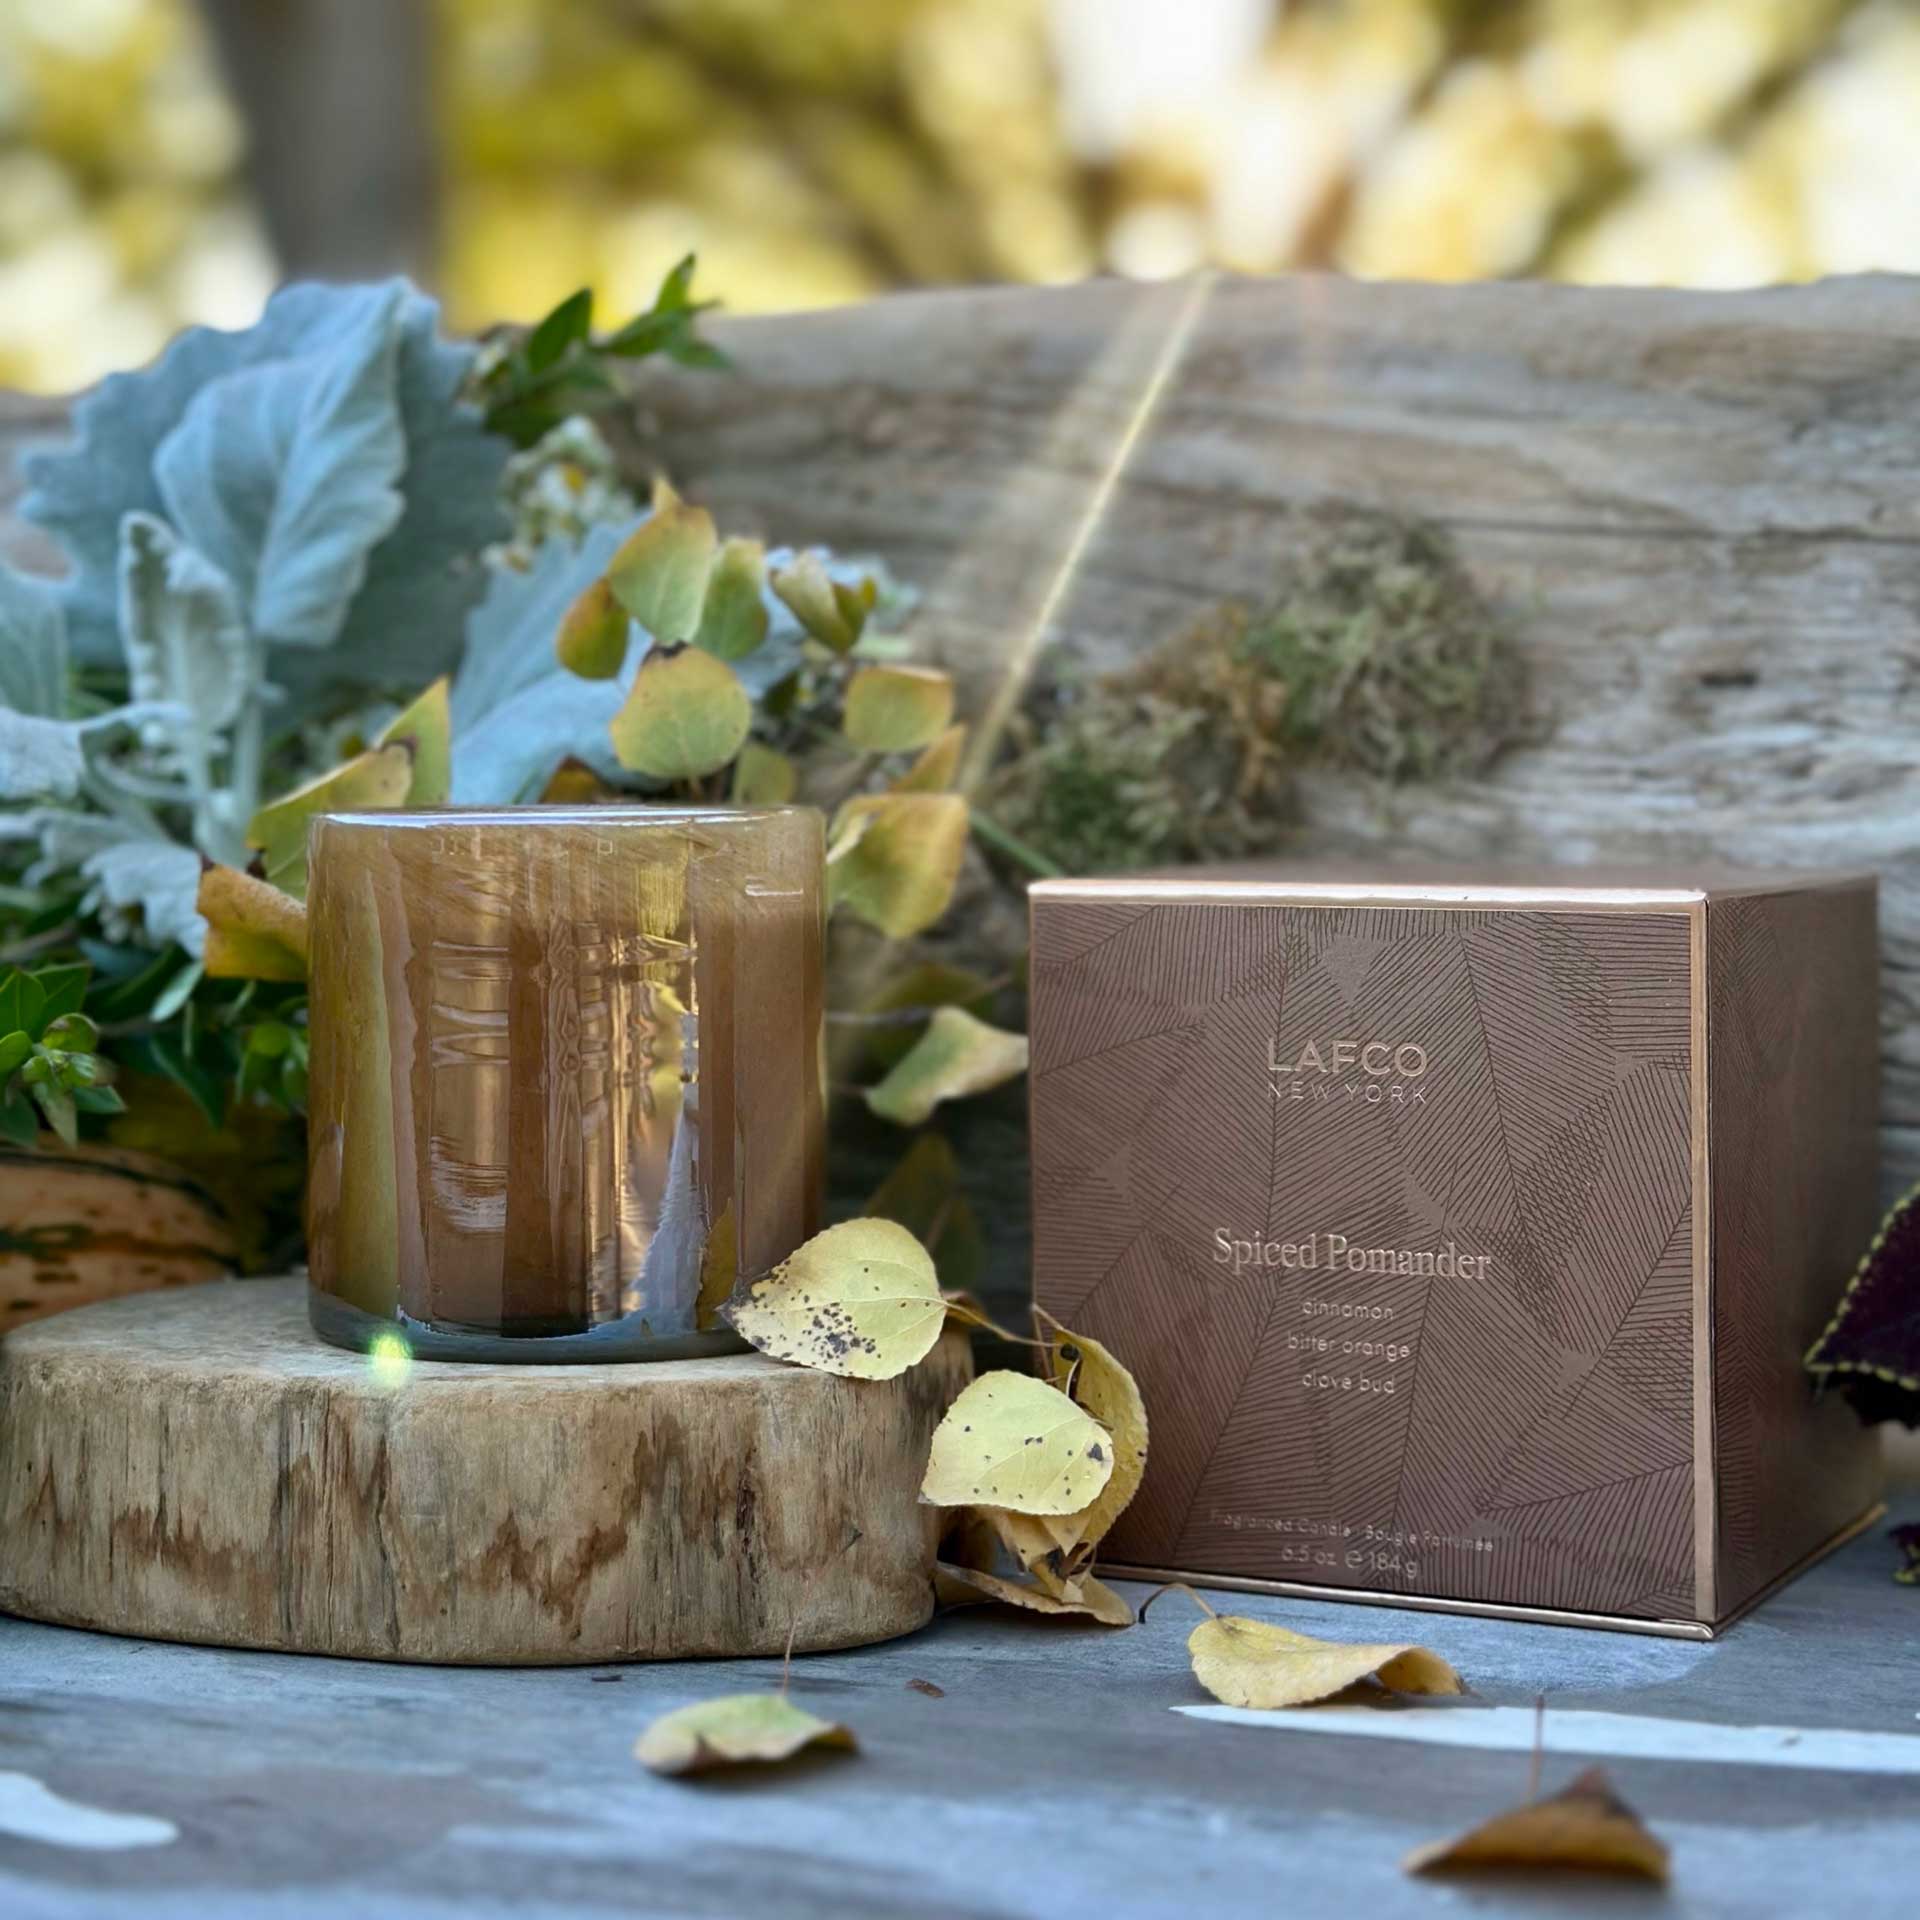 Lafco Spiced Pomander Candle (Petite)